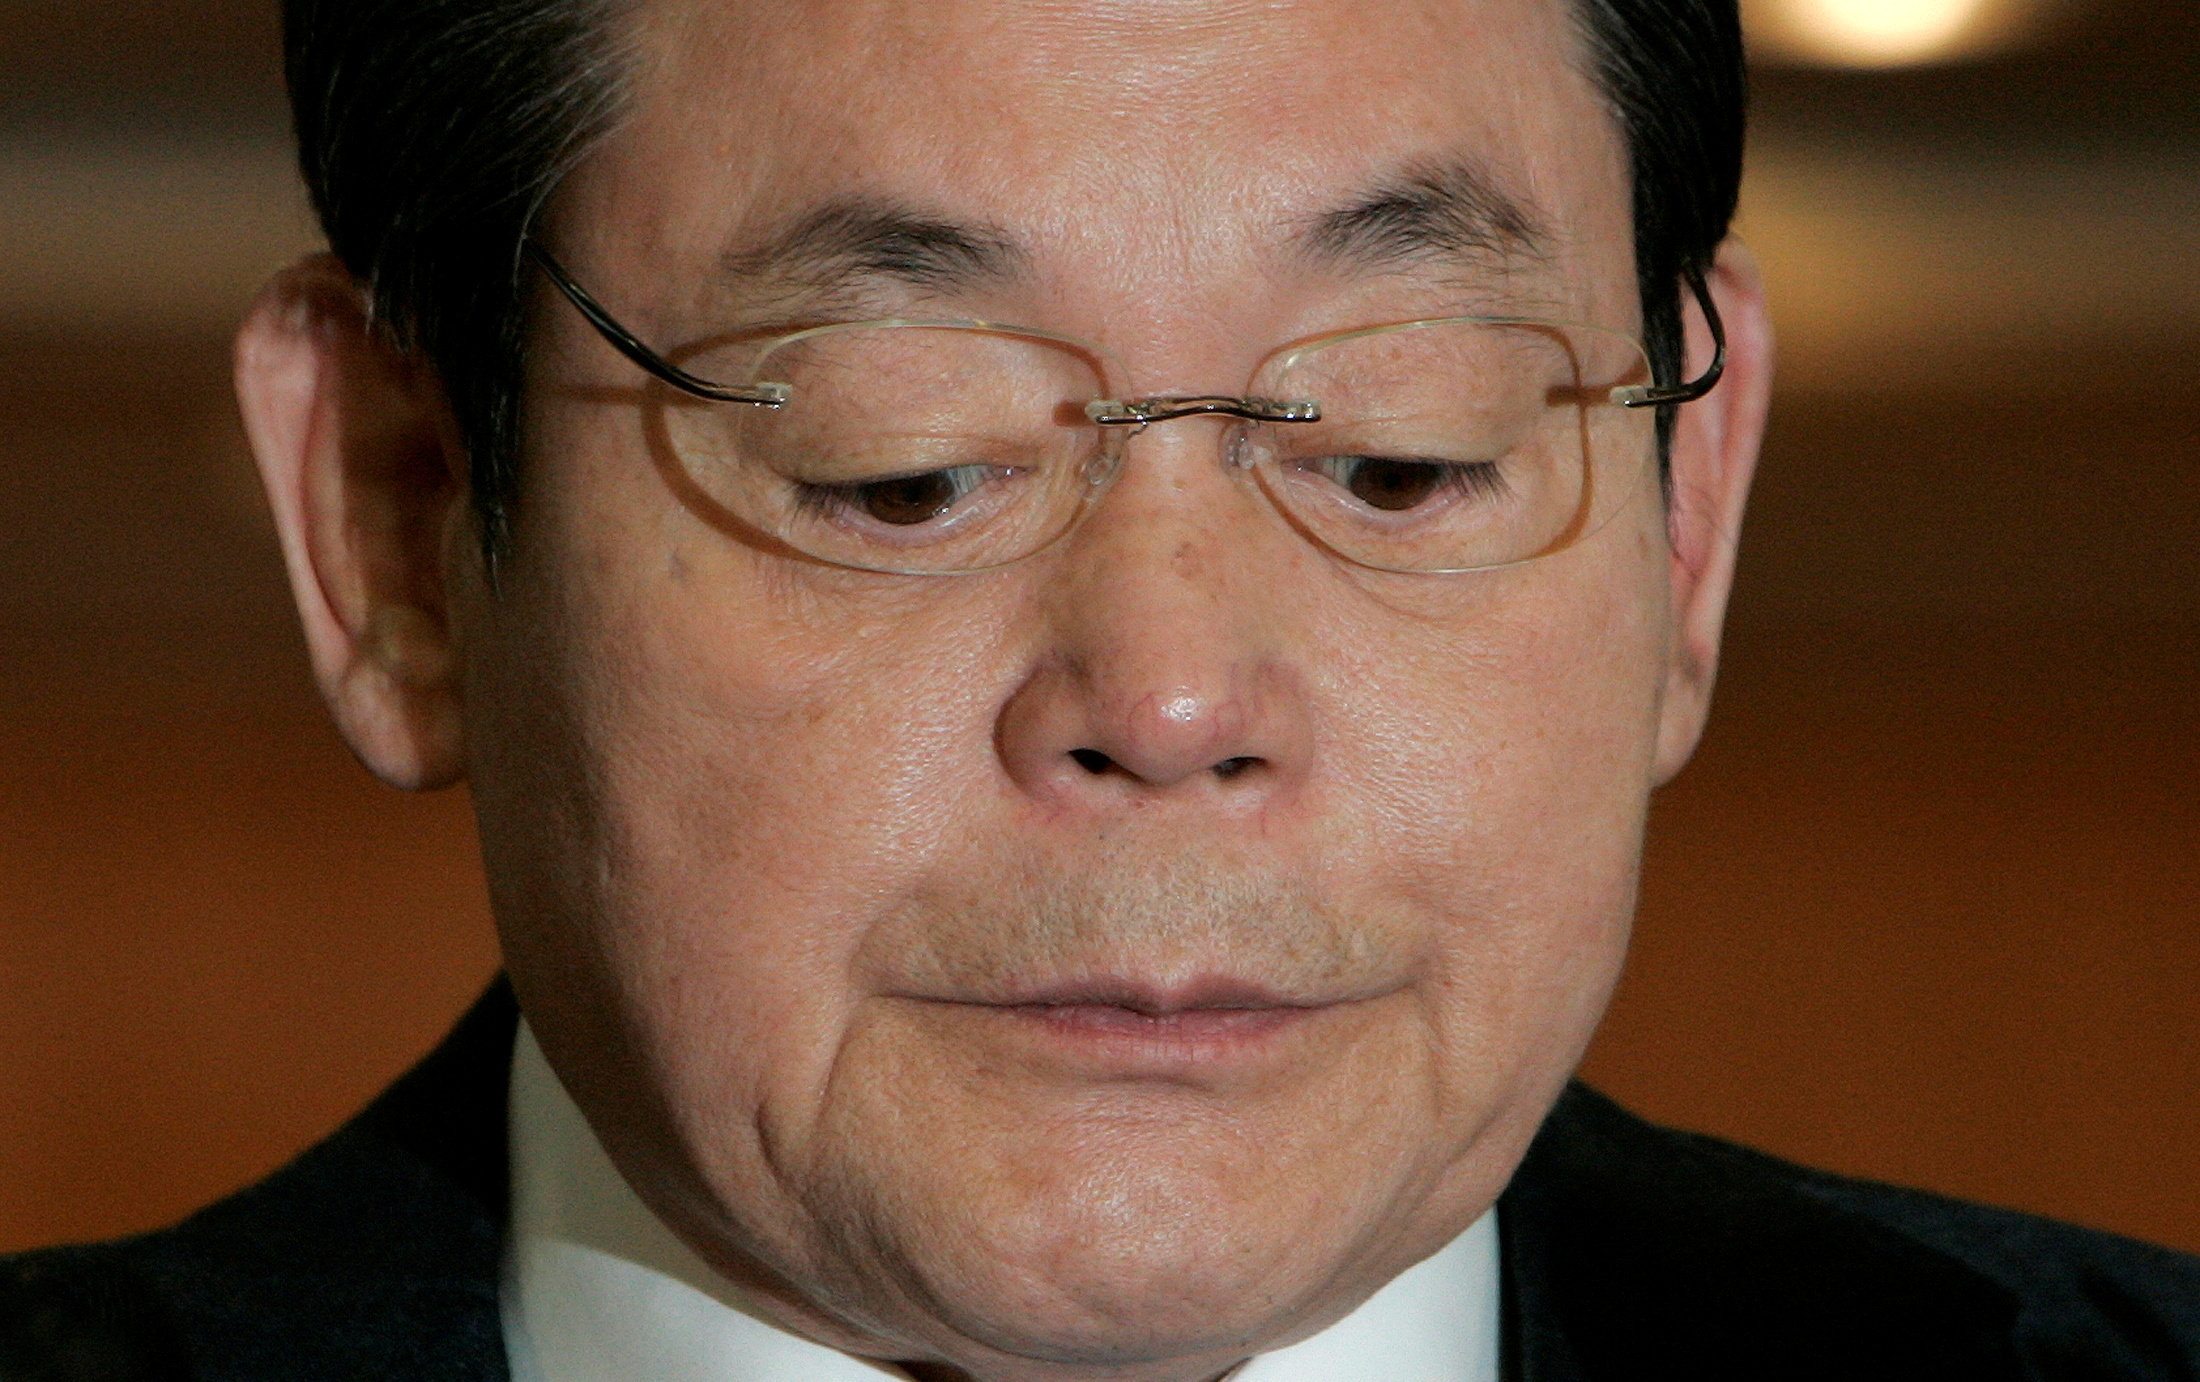 Samsung Group Chairman Lee reacts during a news conference regarding his resignation at the company's headquarters in Seoul